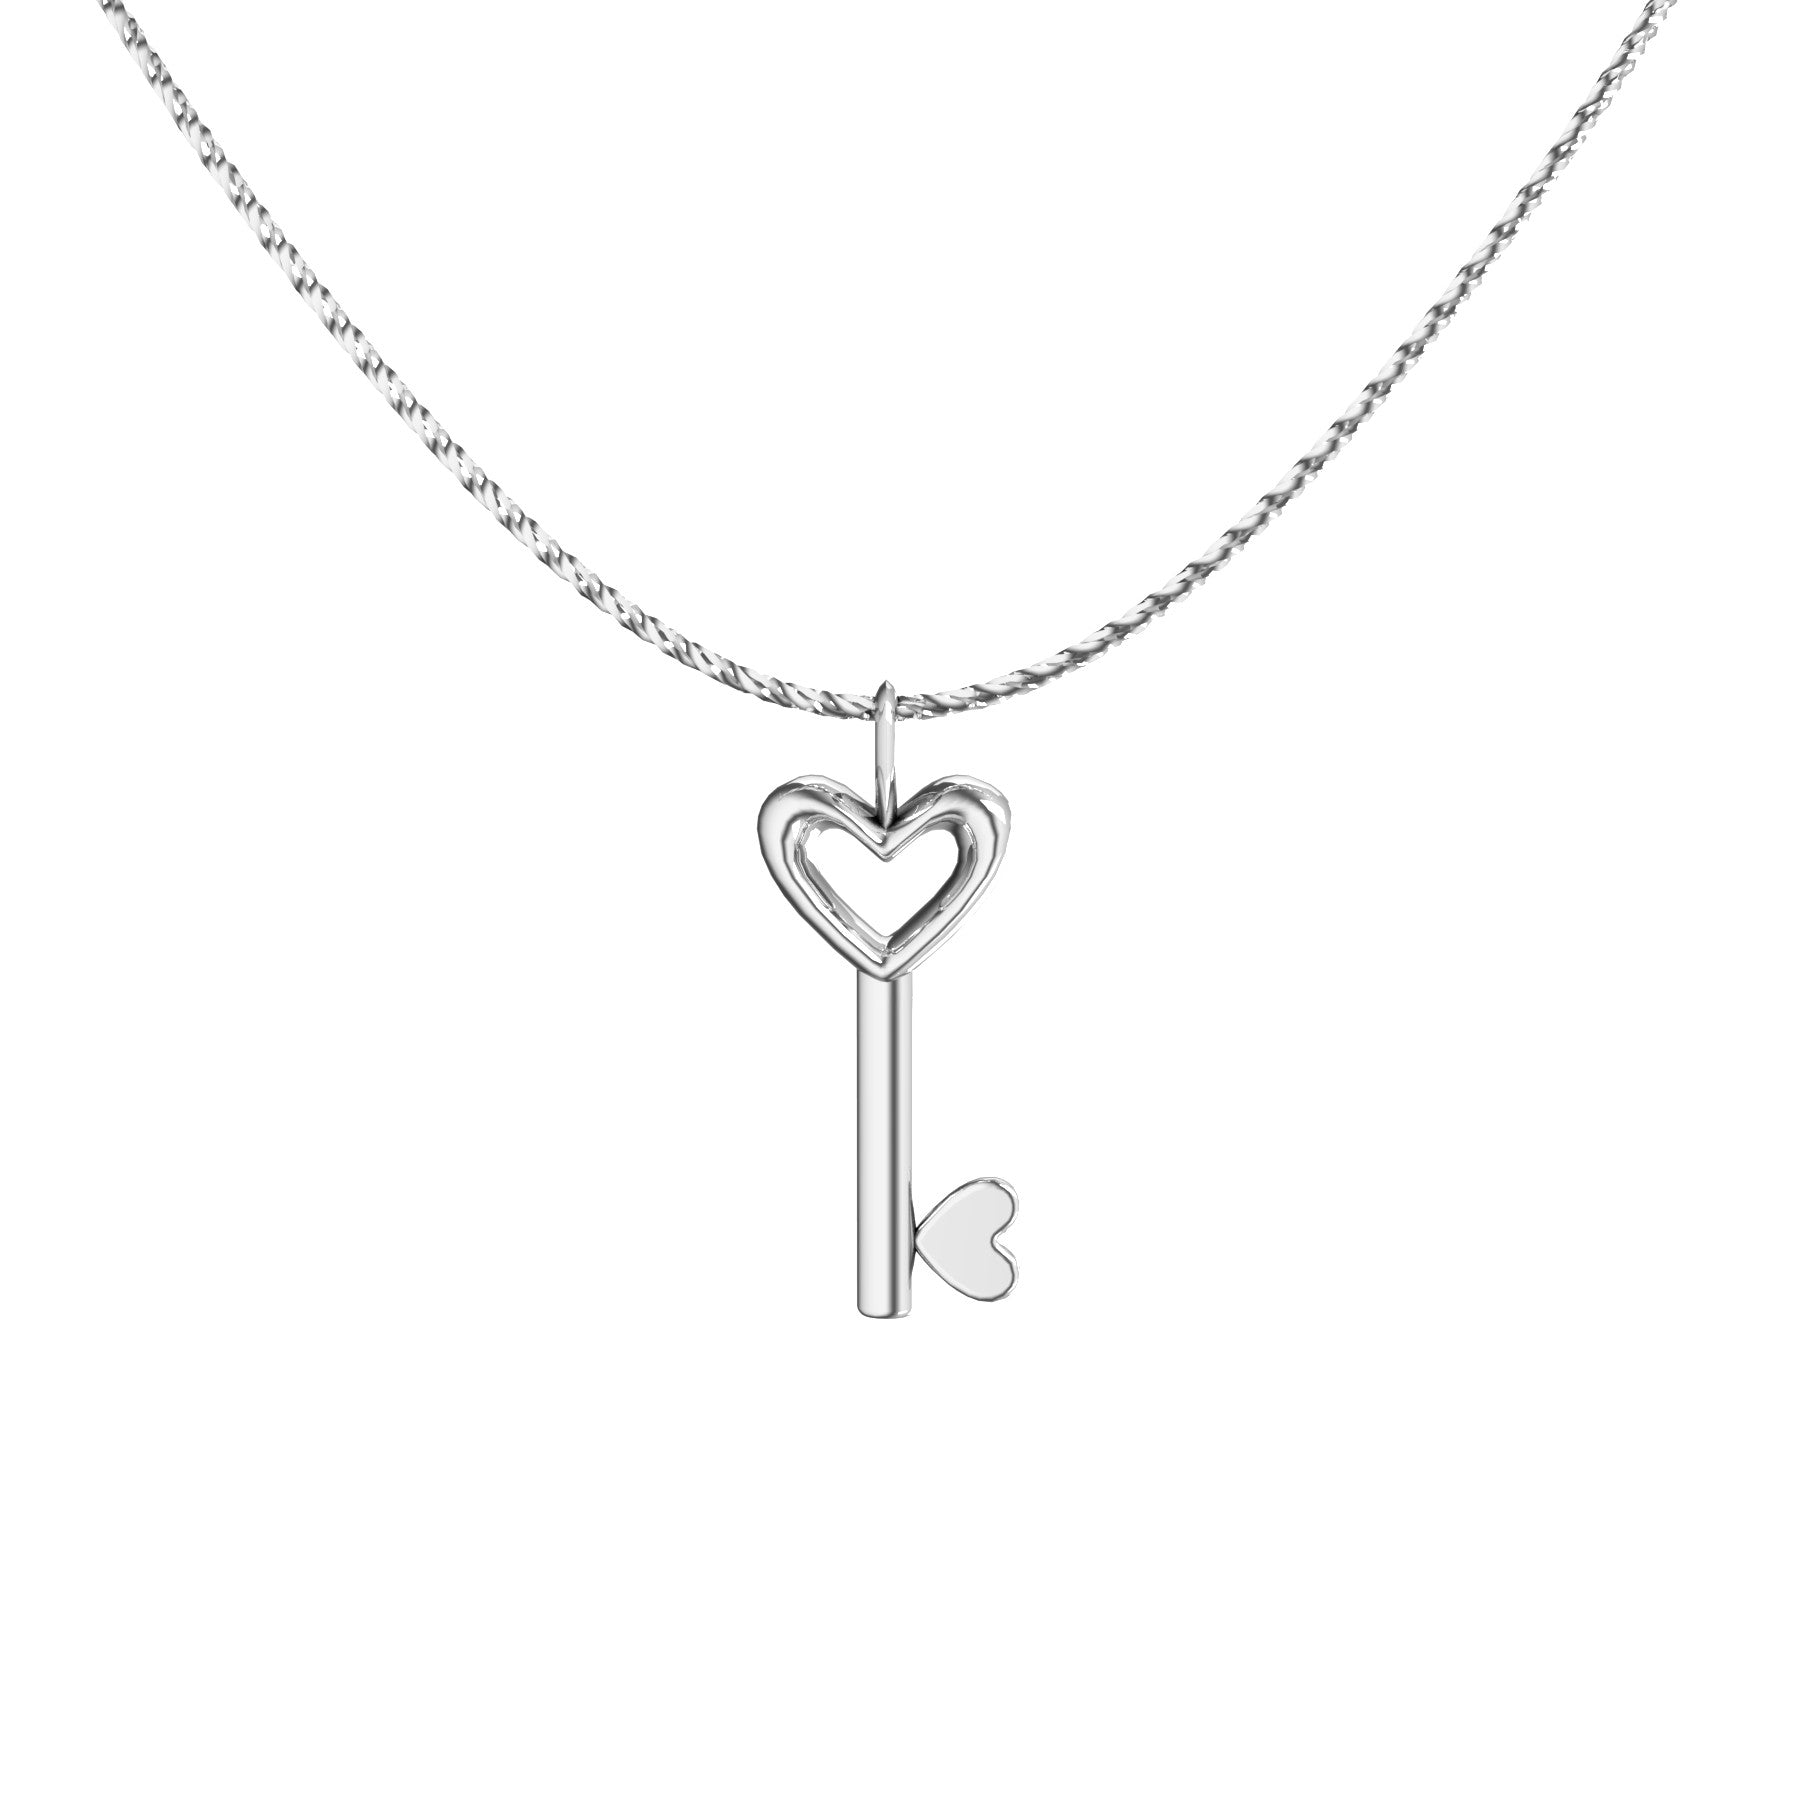 key pendant, 18 k white gold, weight about 4,3 g (0.15 oz), size 31,9x13,1x4,8 mm